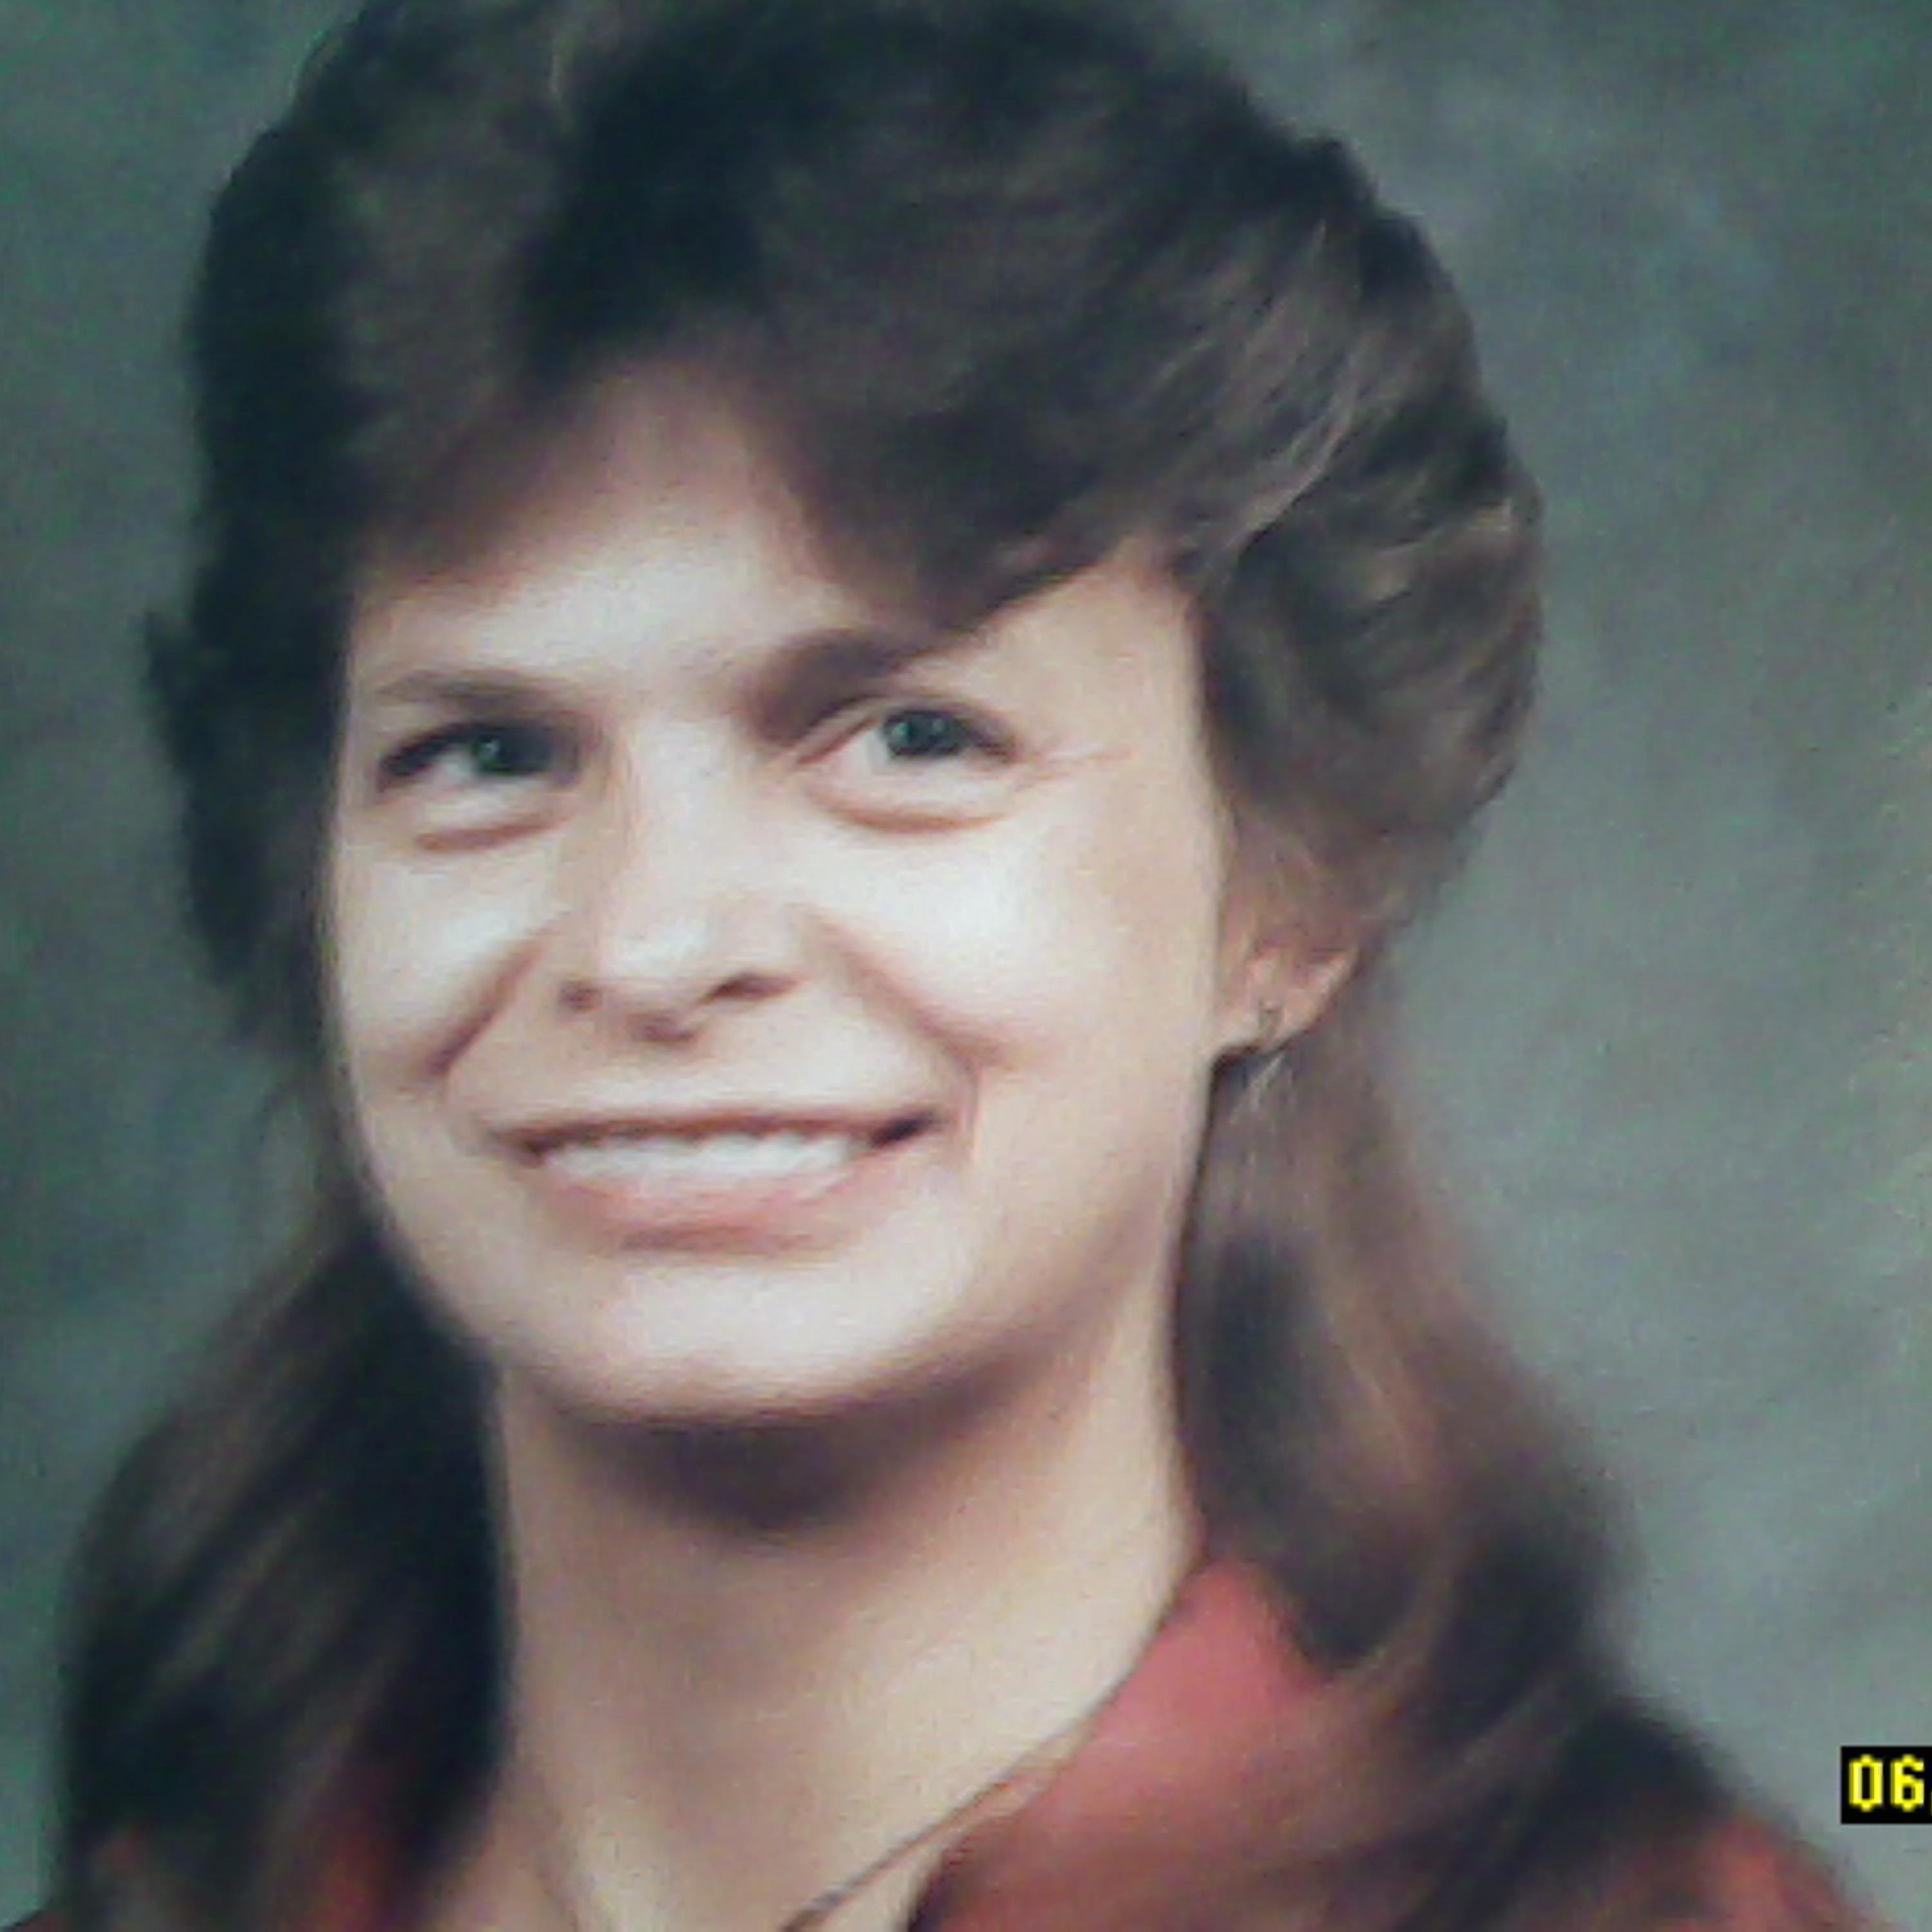 Barbara Frame has been missing from Zanesville, Ohio since Jan. 30, 1985